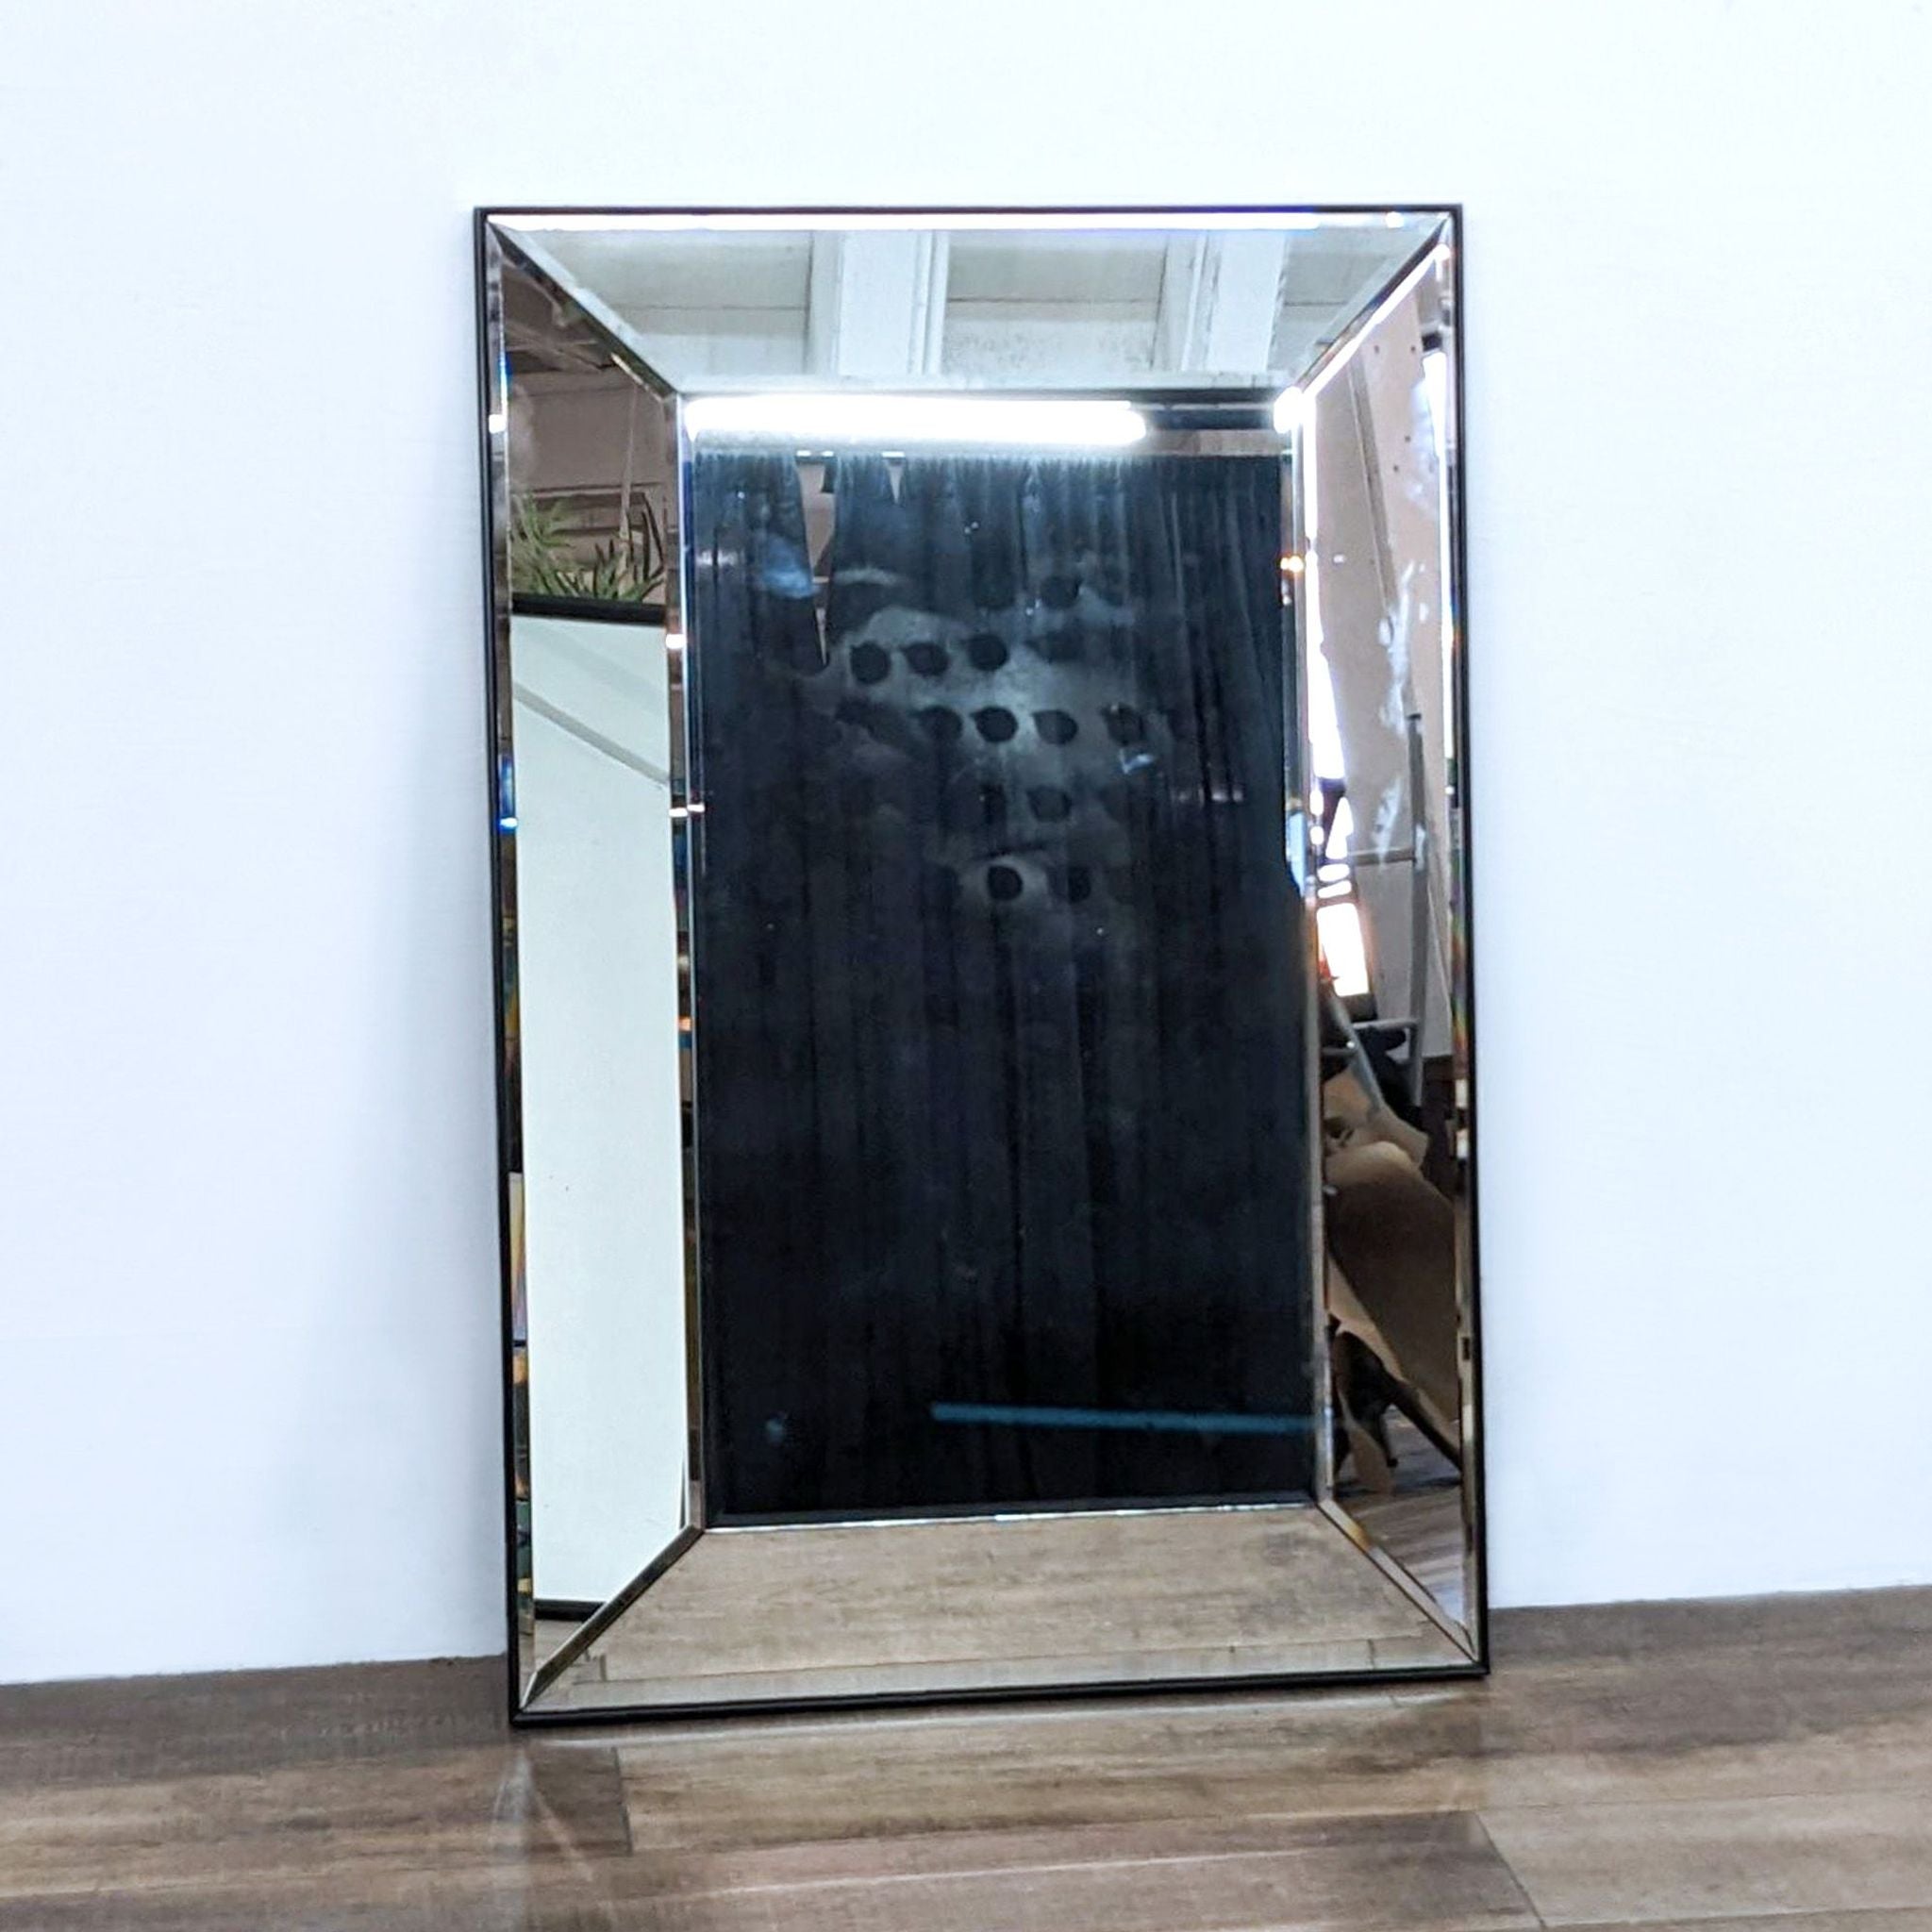 Alt text 1: Williams Sonoma Home rectangular mirror with beveled mirrored frame, reflecting an interior space.